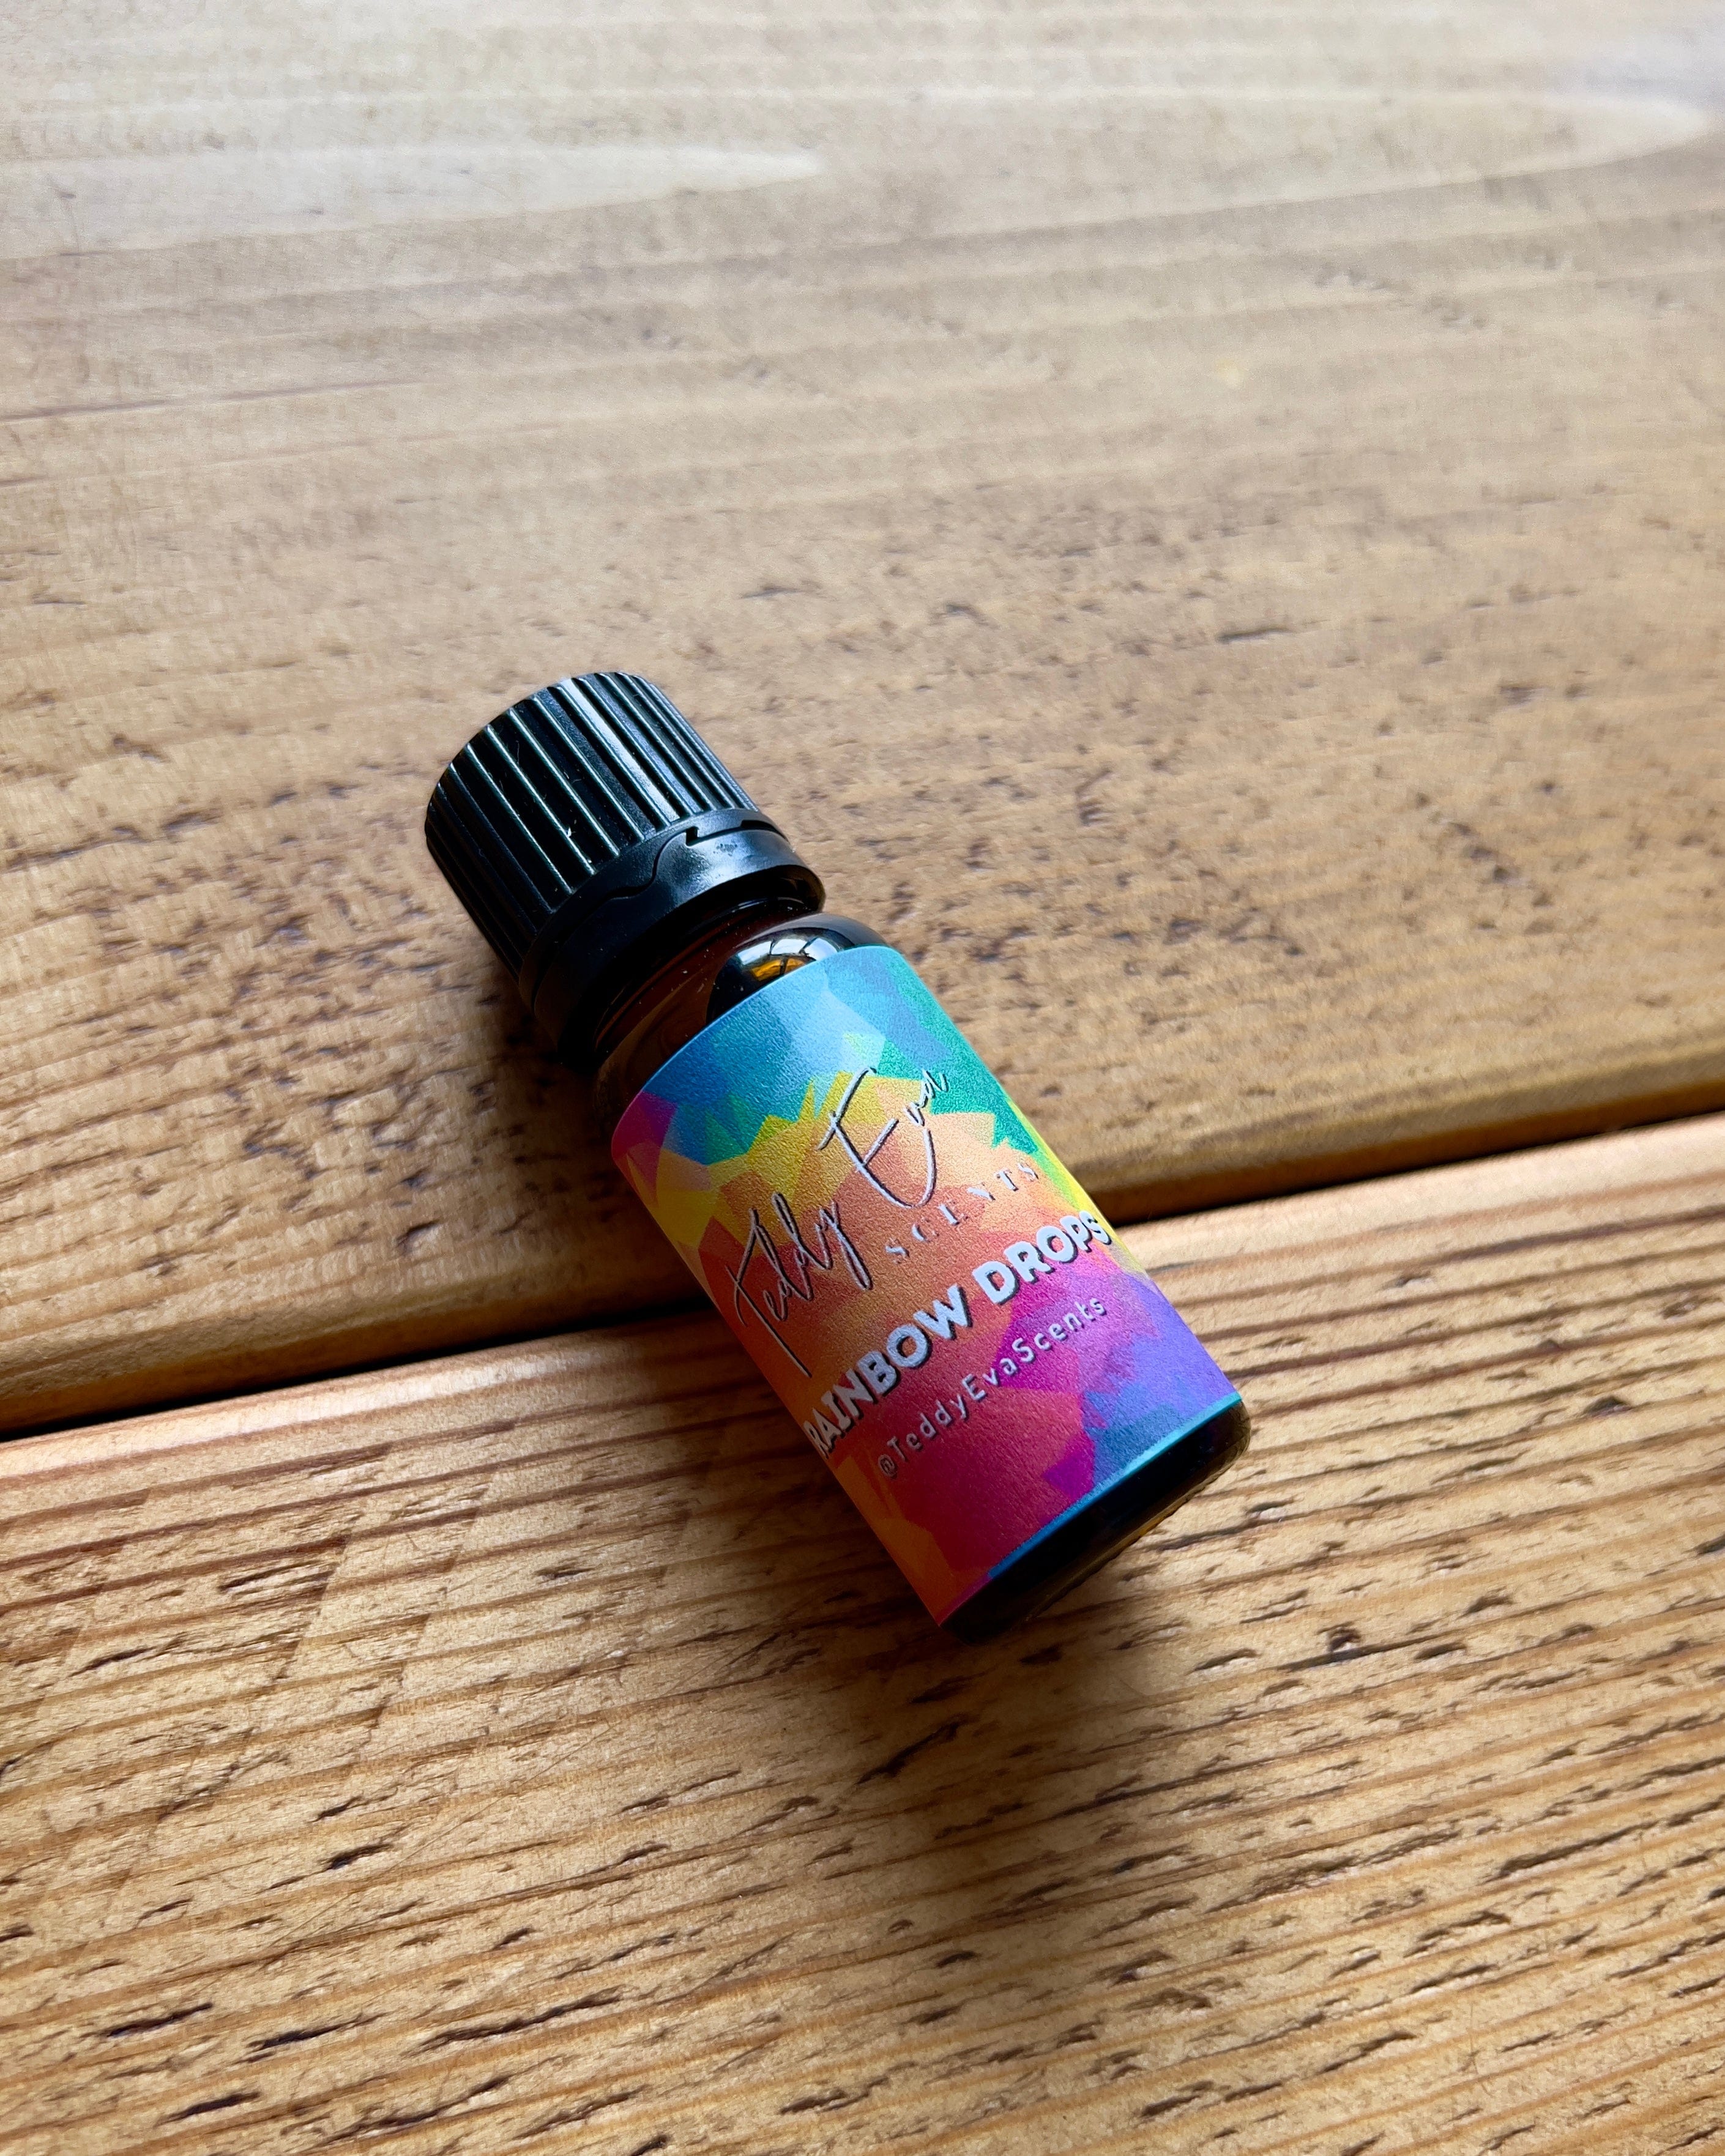 How to Use 10ml Fragrance Oils: Diffuser or Oil Burner